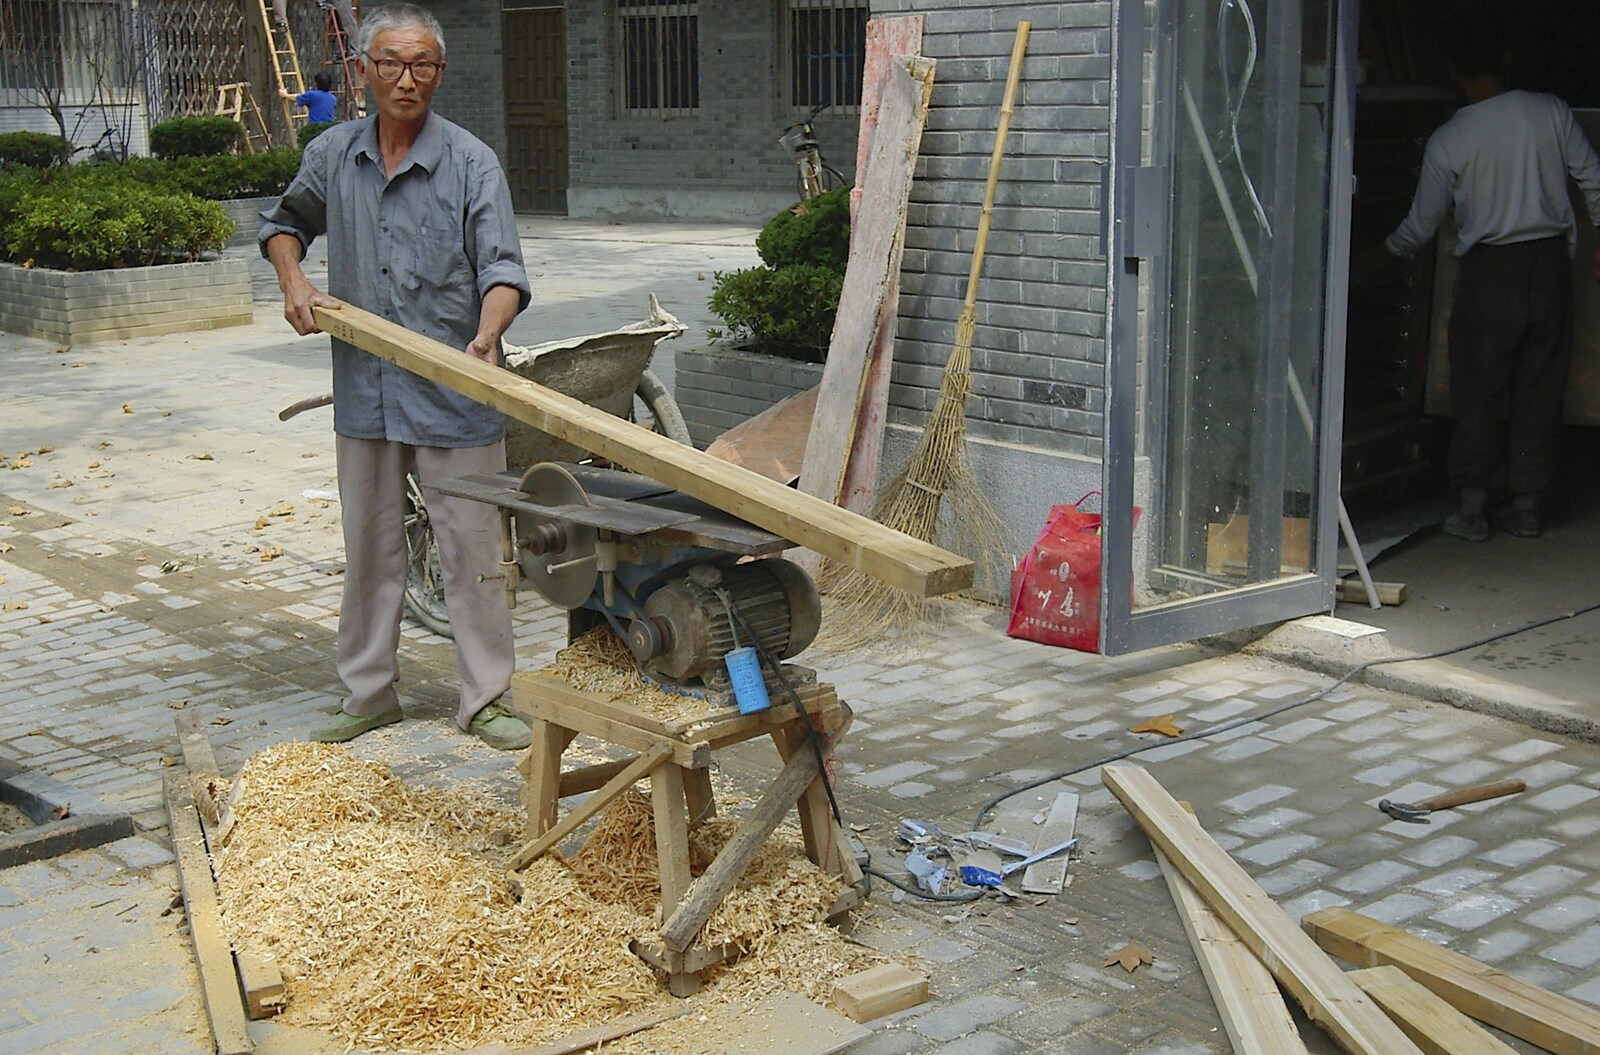 A guy saws wood in the street near the office from A Few Days in Nanjing, Jiangsu Province, China - 7th October 2006